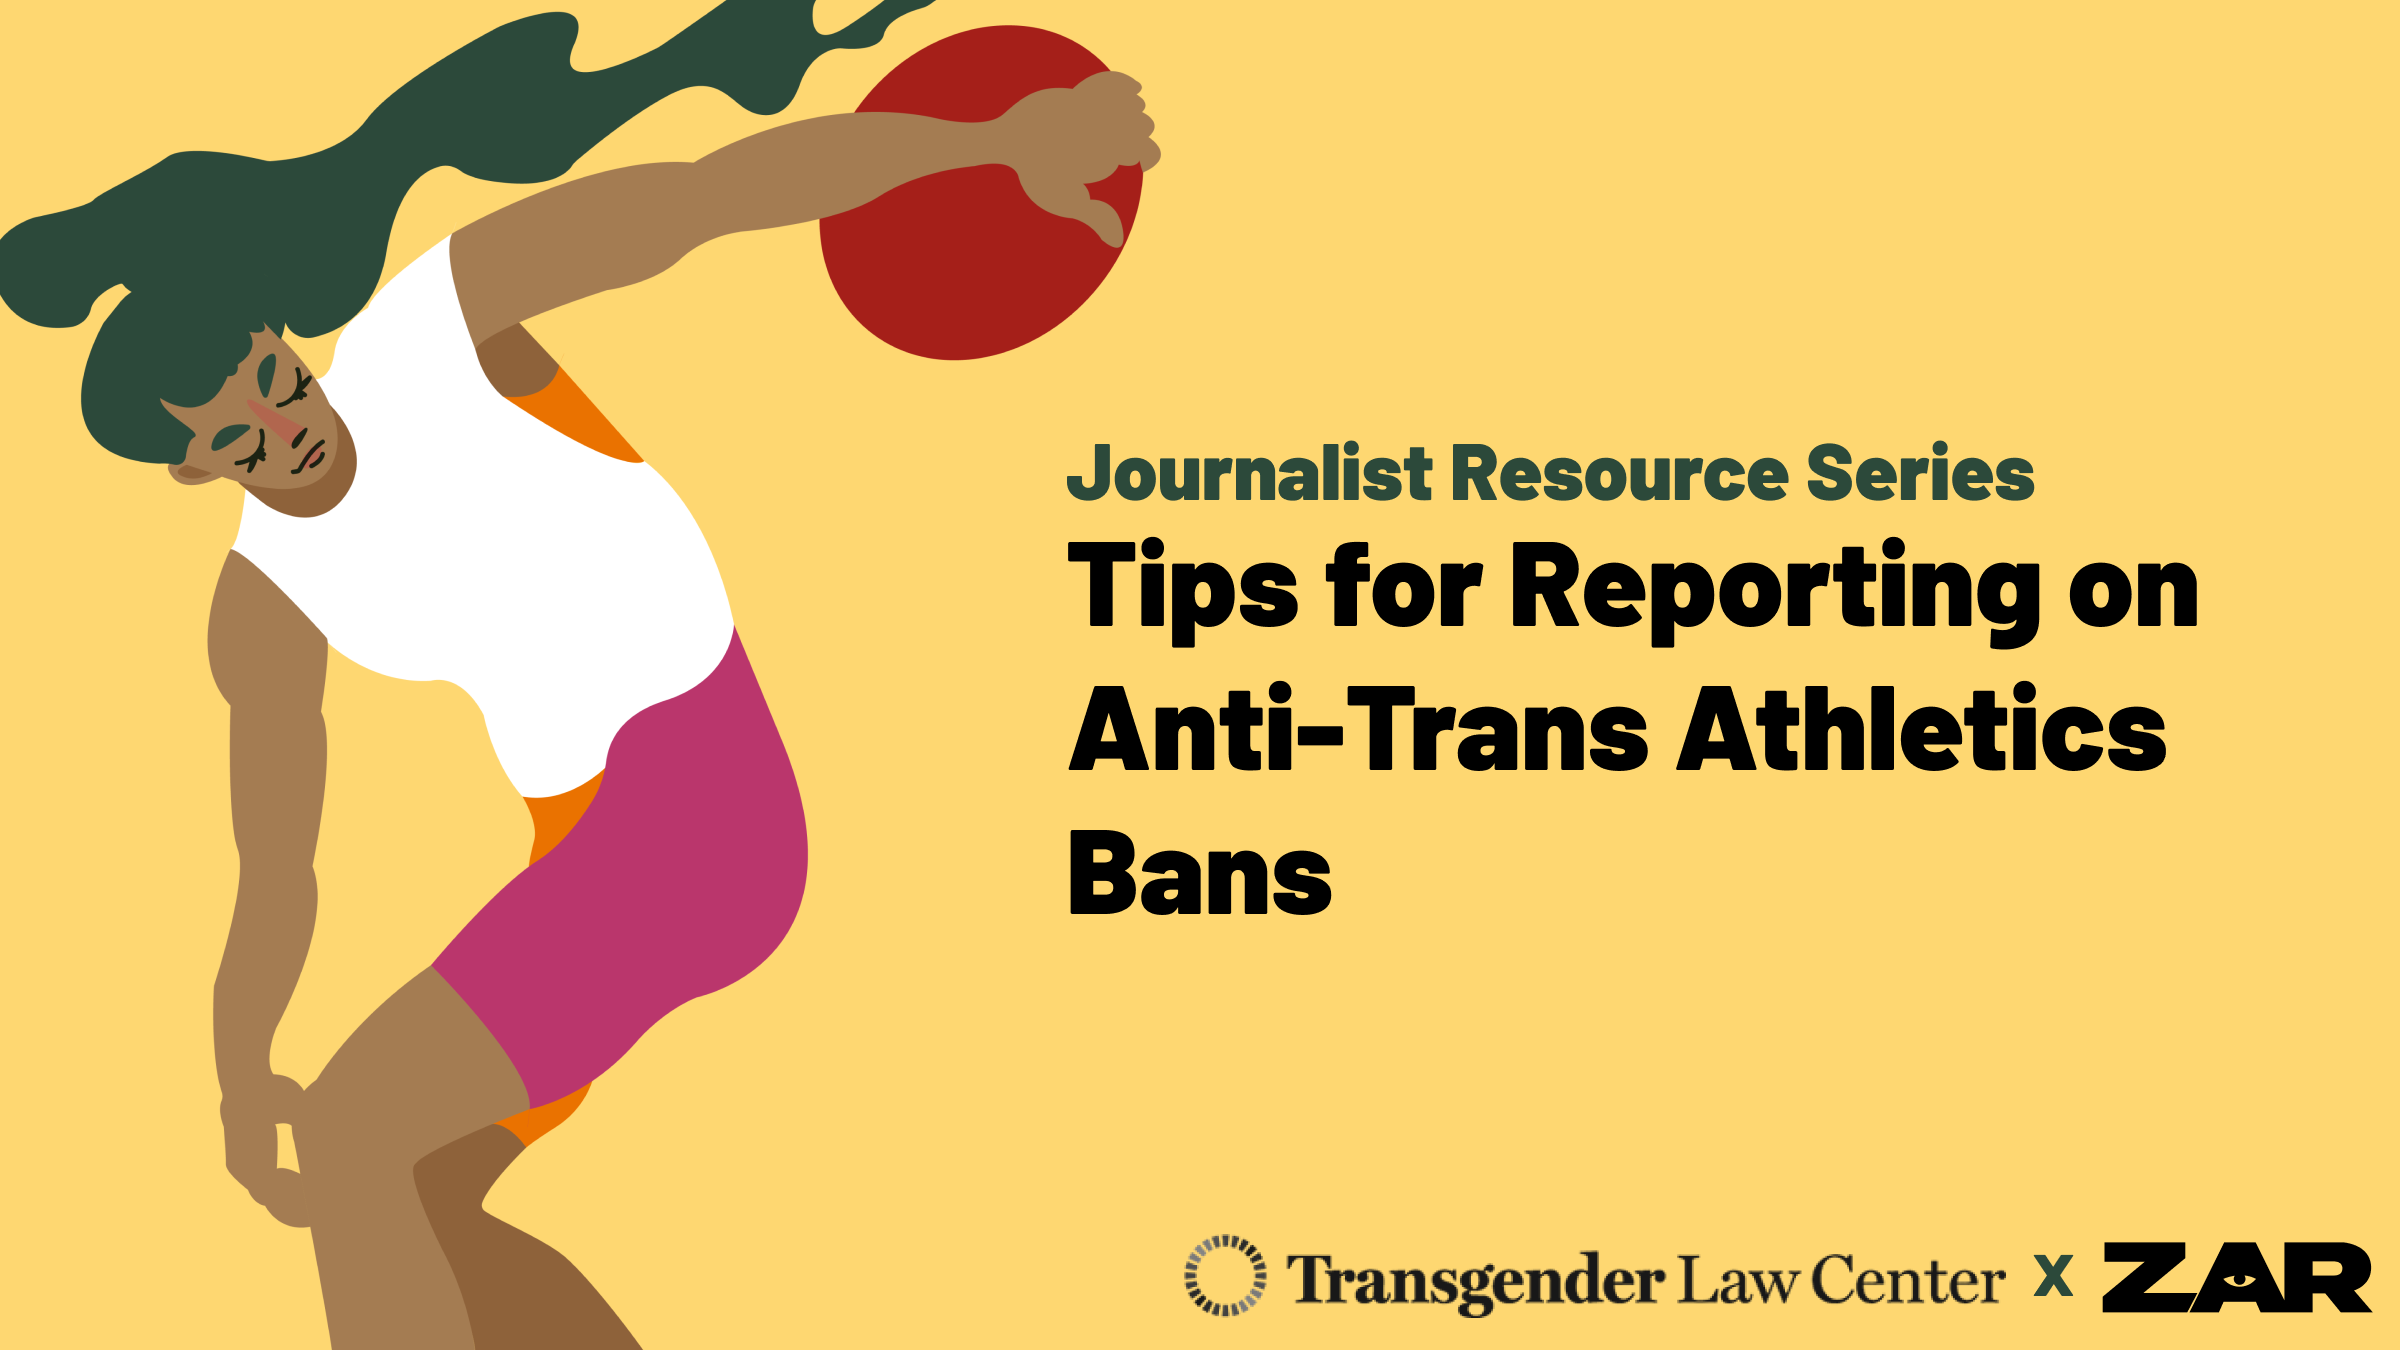 Illustrated image of a person swinging a shotput. Text reads: Journalist Resource Series Tips for Reporting on Anti-Trans Athletic Bans. Branded with the logos for Transgender Law Center and Zar